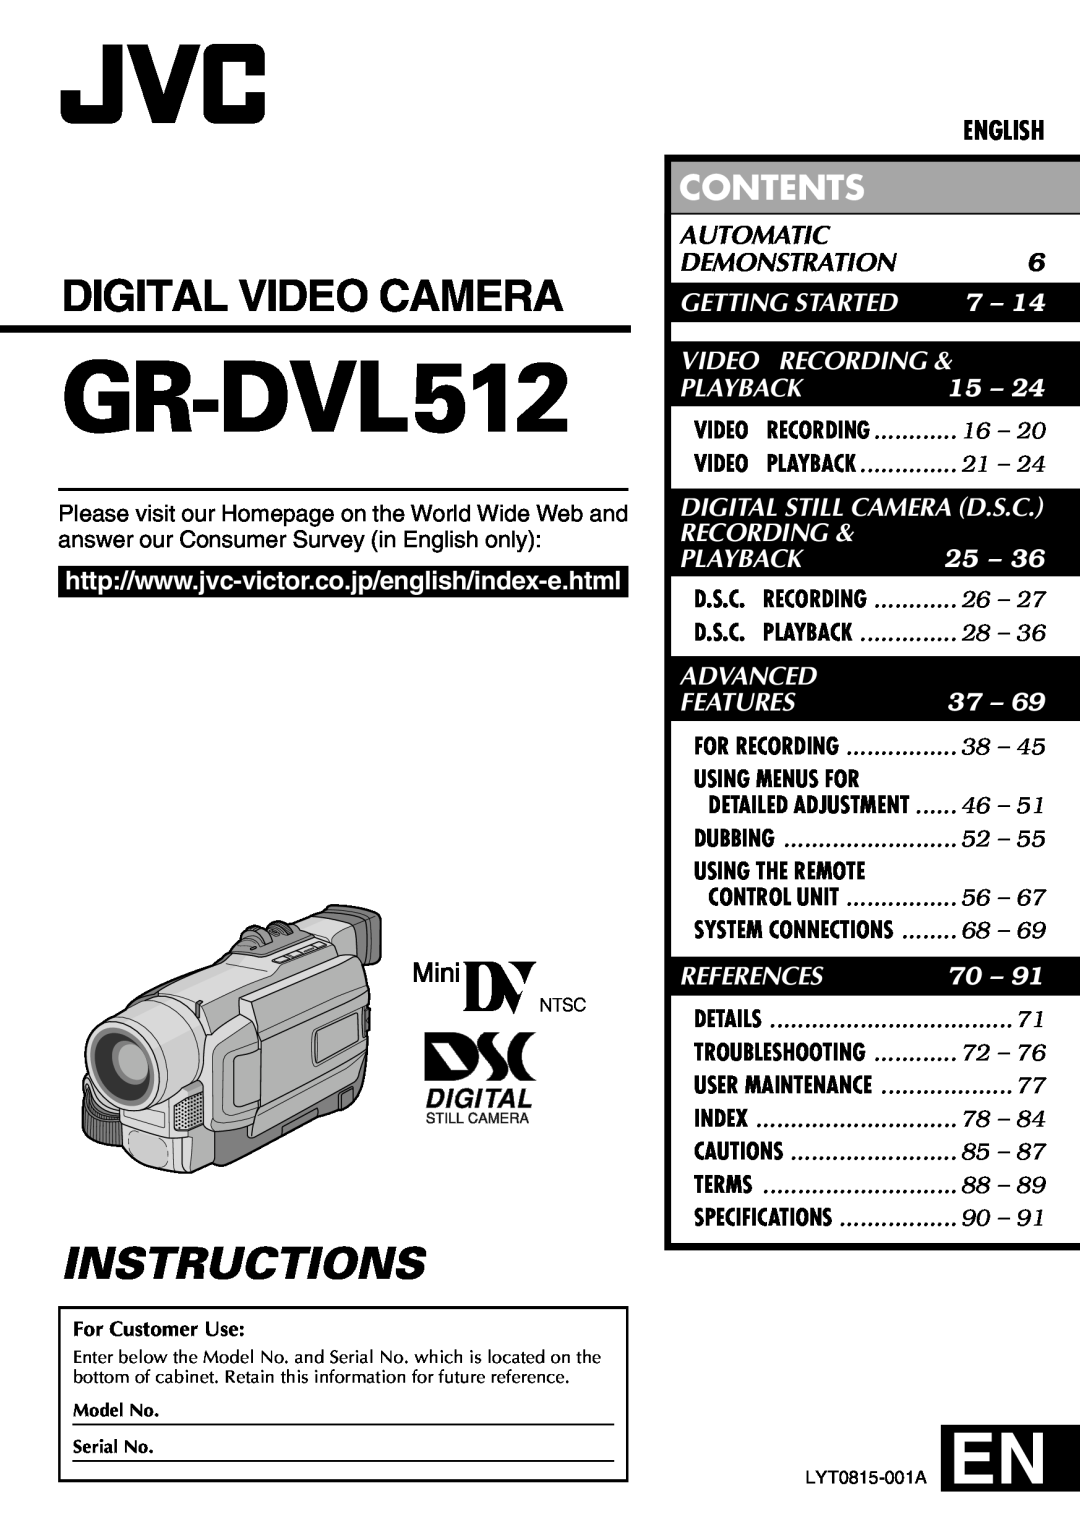 JVC GR-DVL512 specifications Contents, Automatic, Demonstration, Digital Video Camera, Instructions 